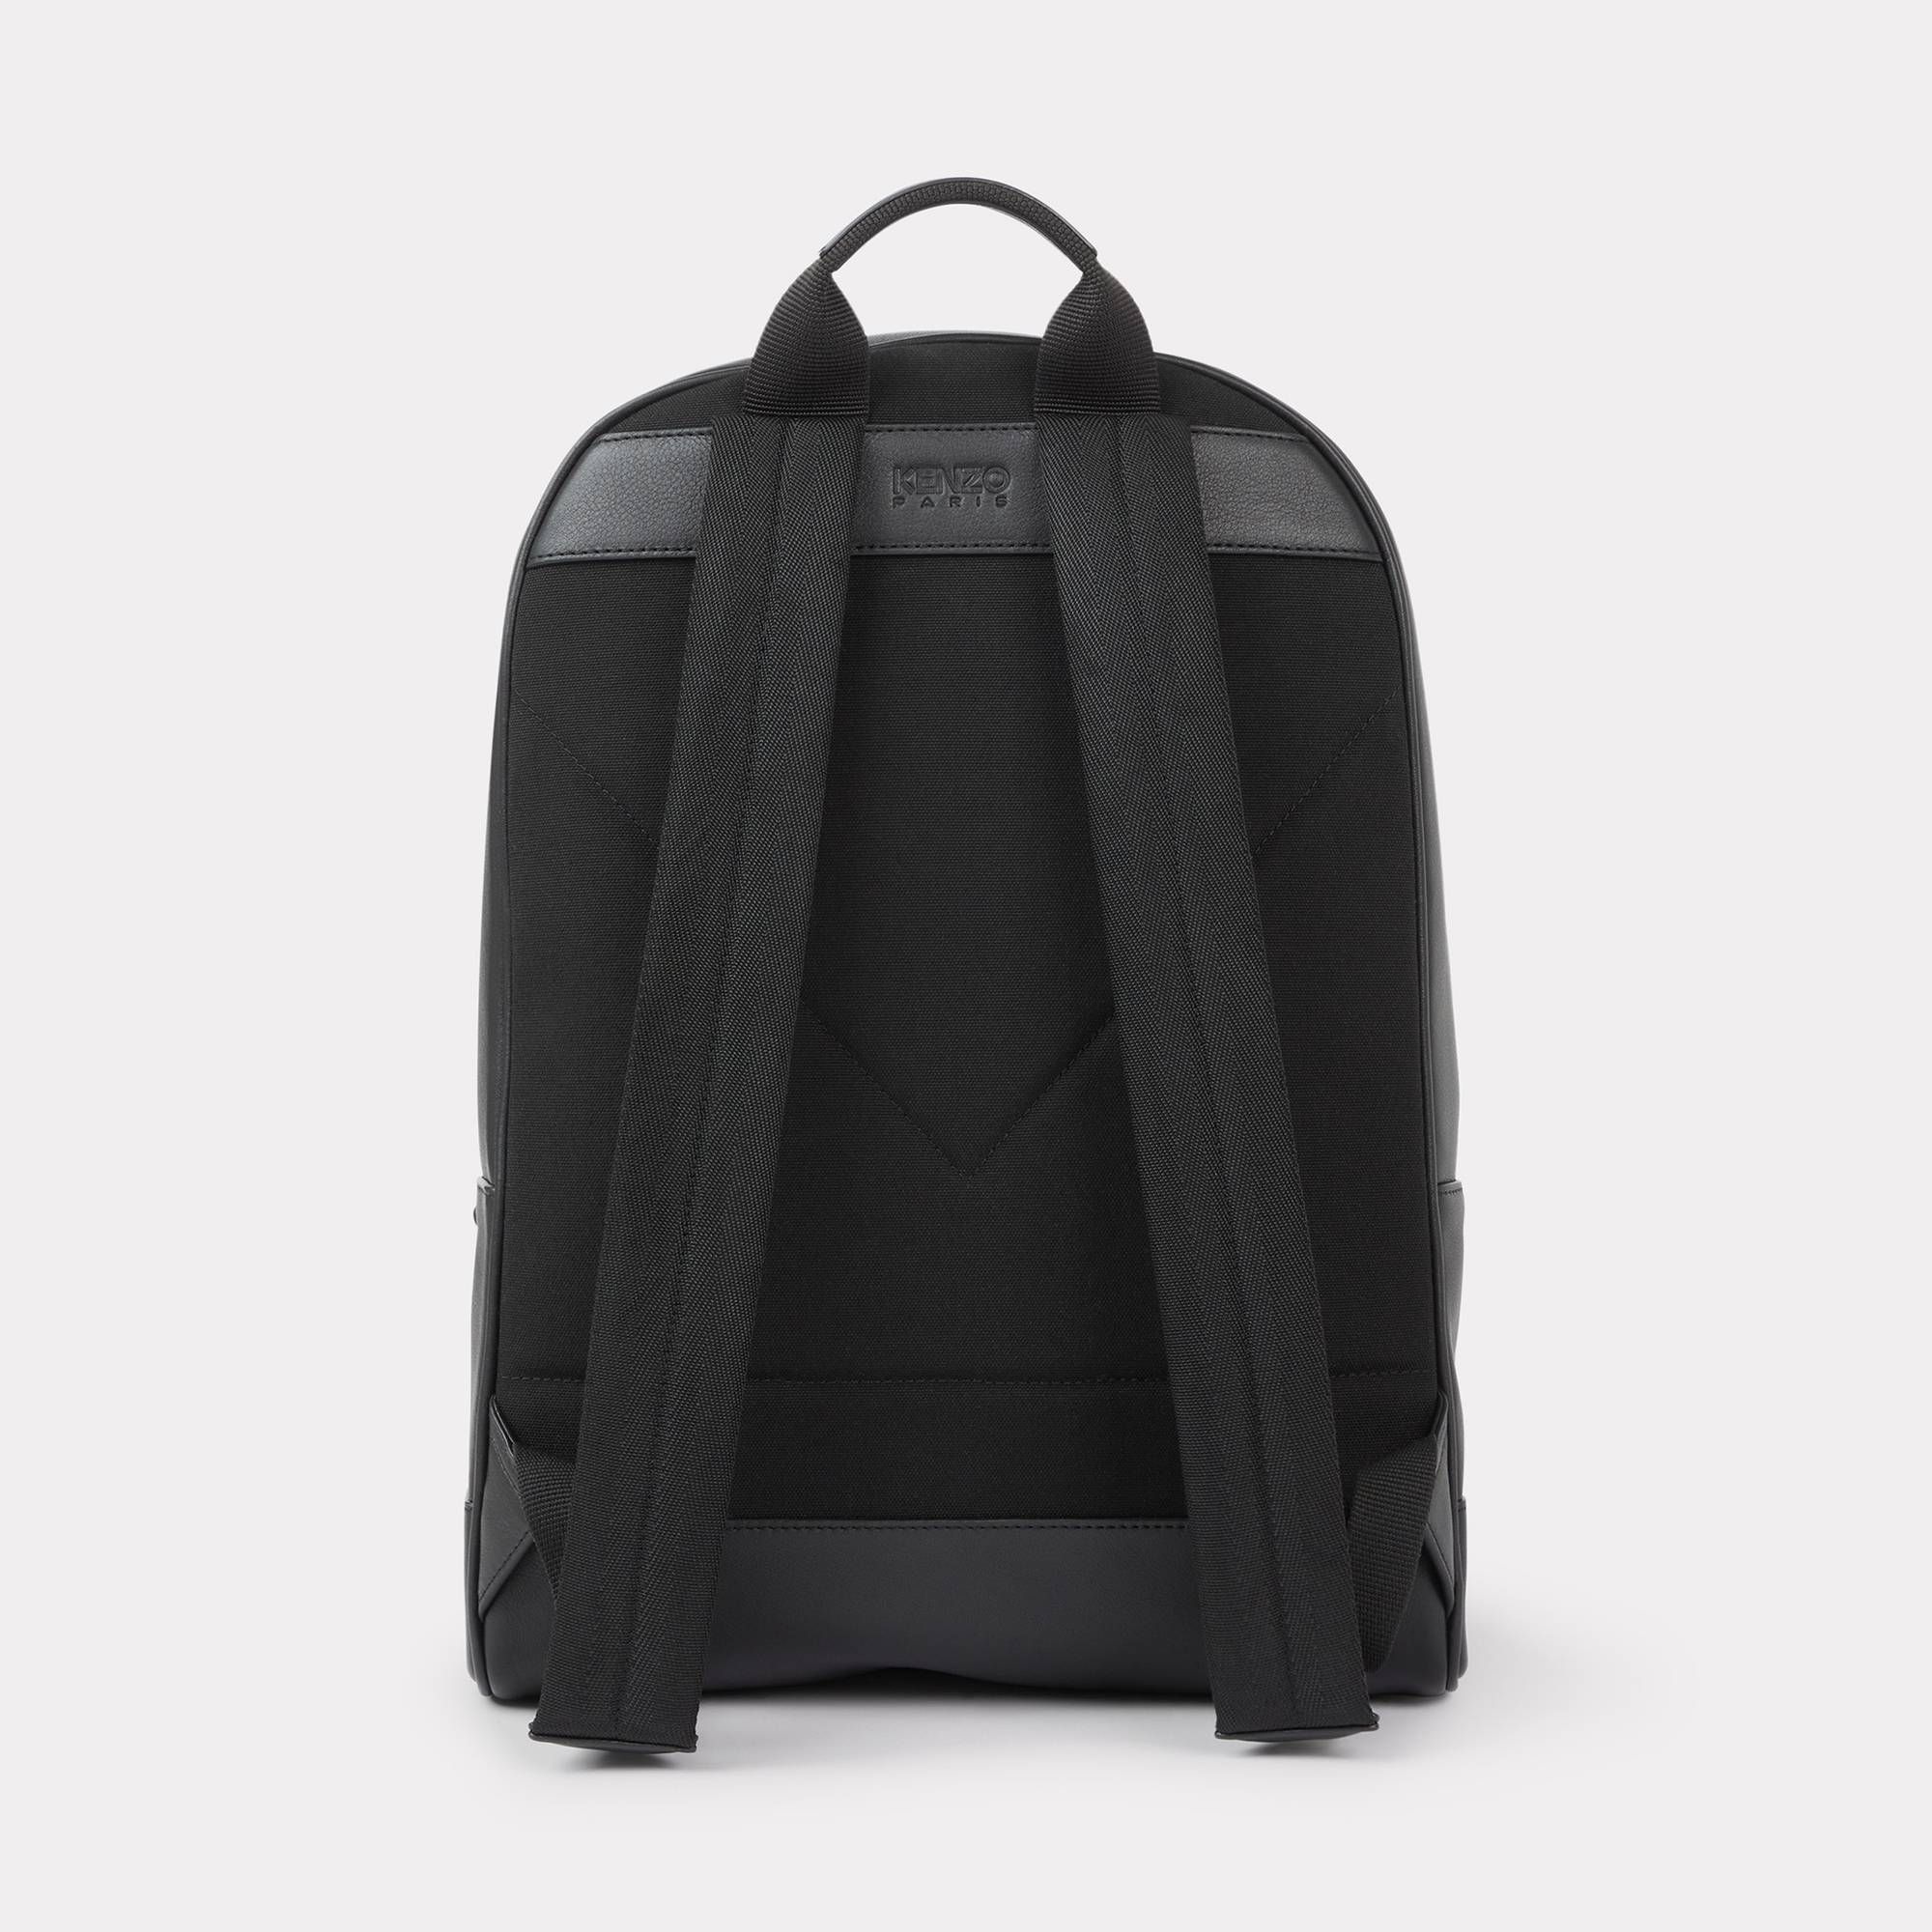  'KENZOGRAPHY' Leather Backpack - Black 